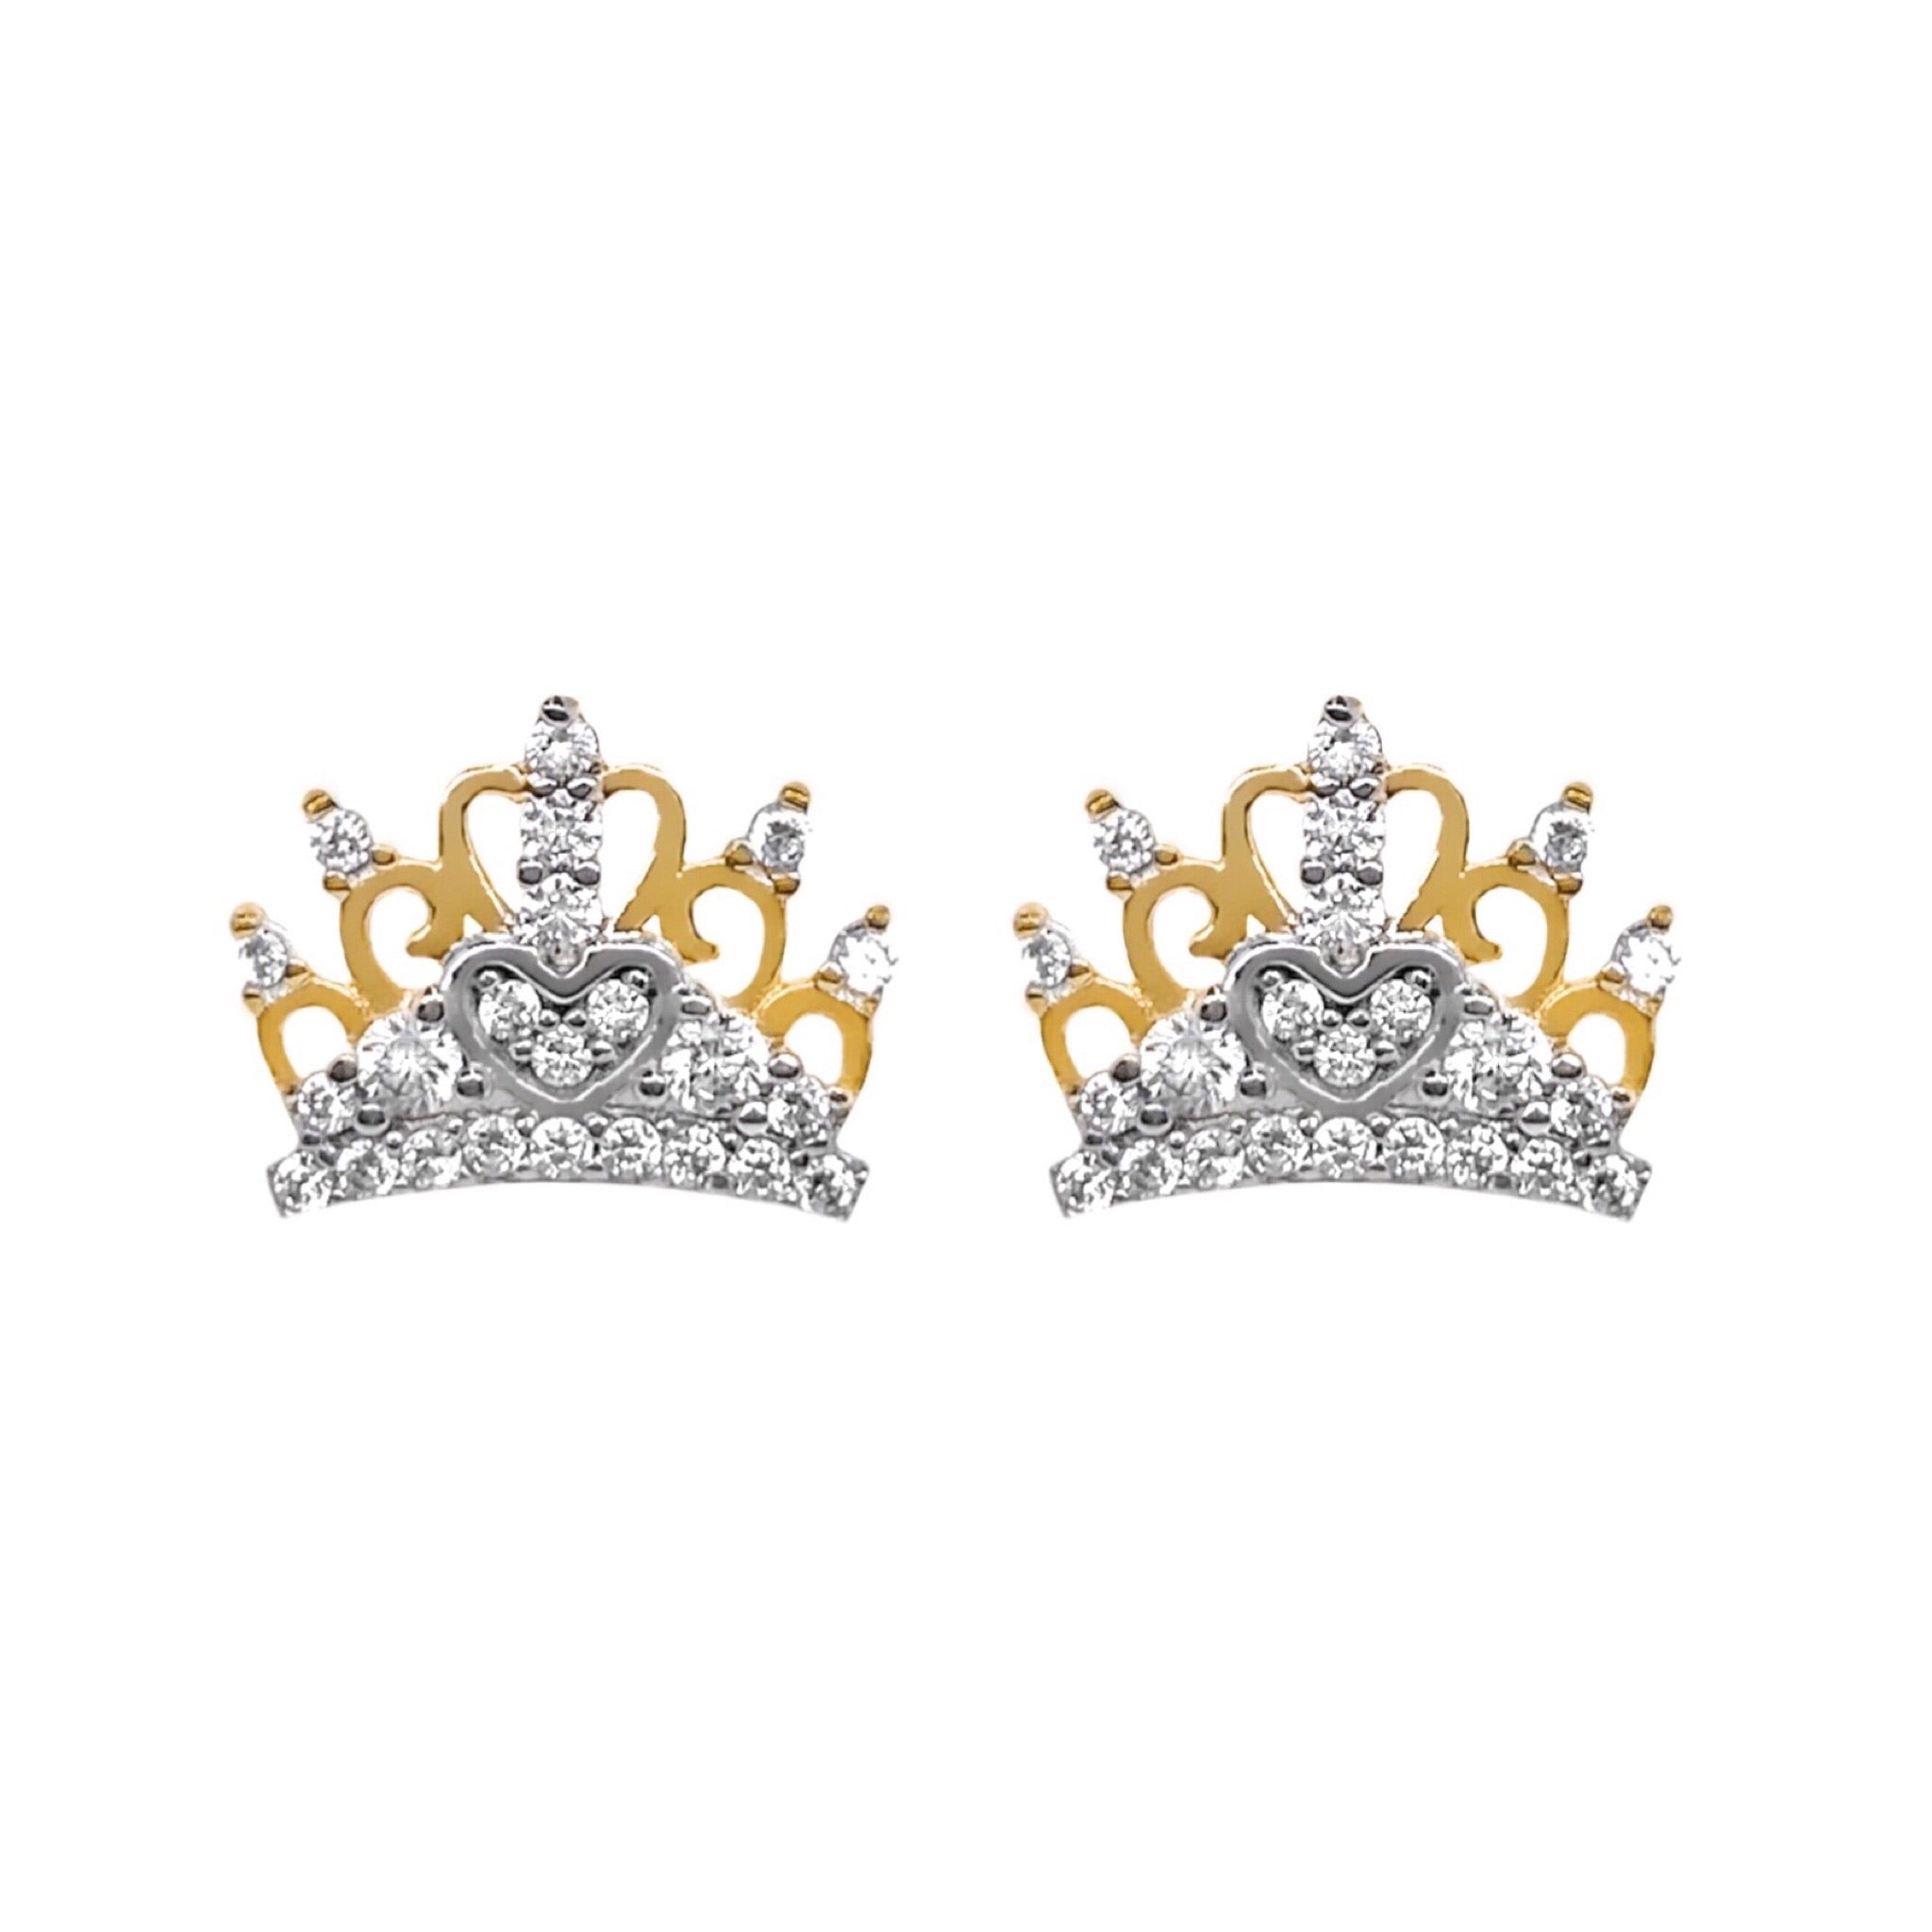 10K YELLOW GOLD PAVE CROWN EARRINGS